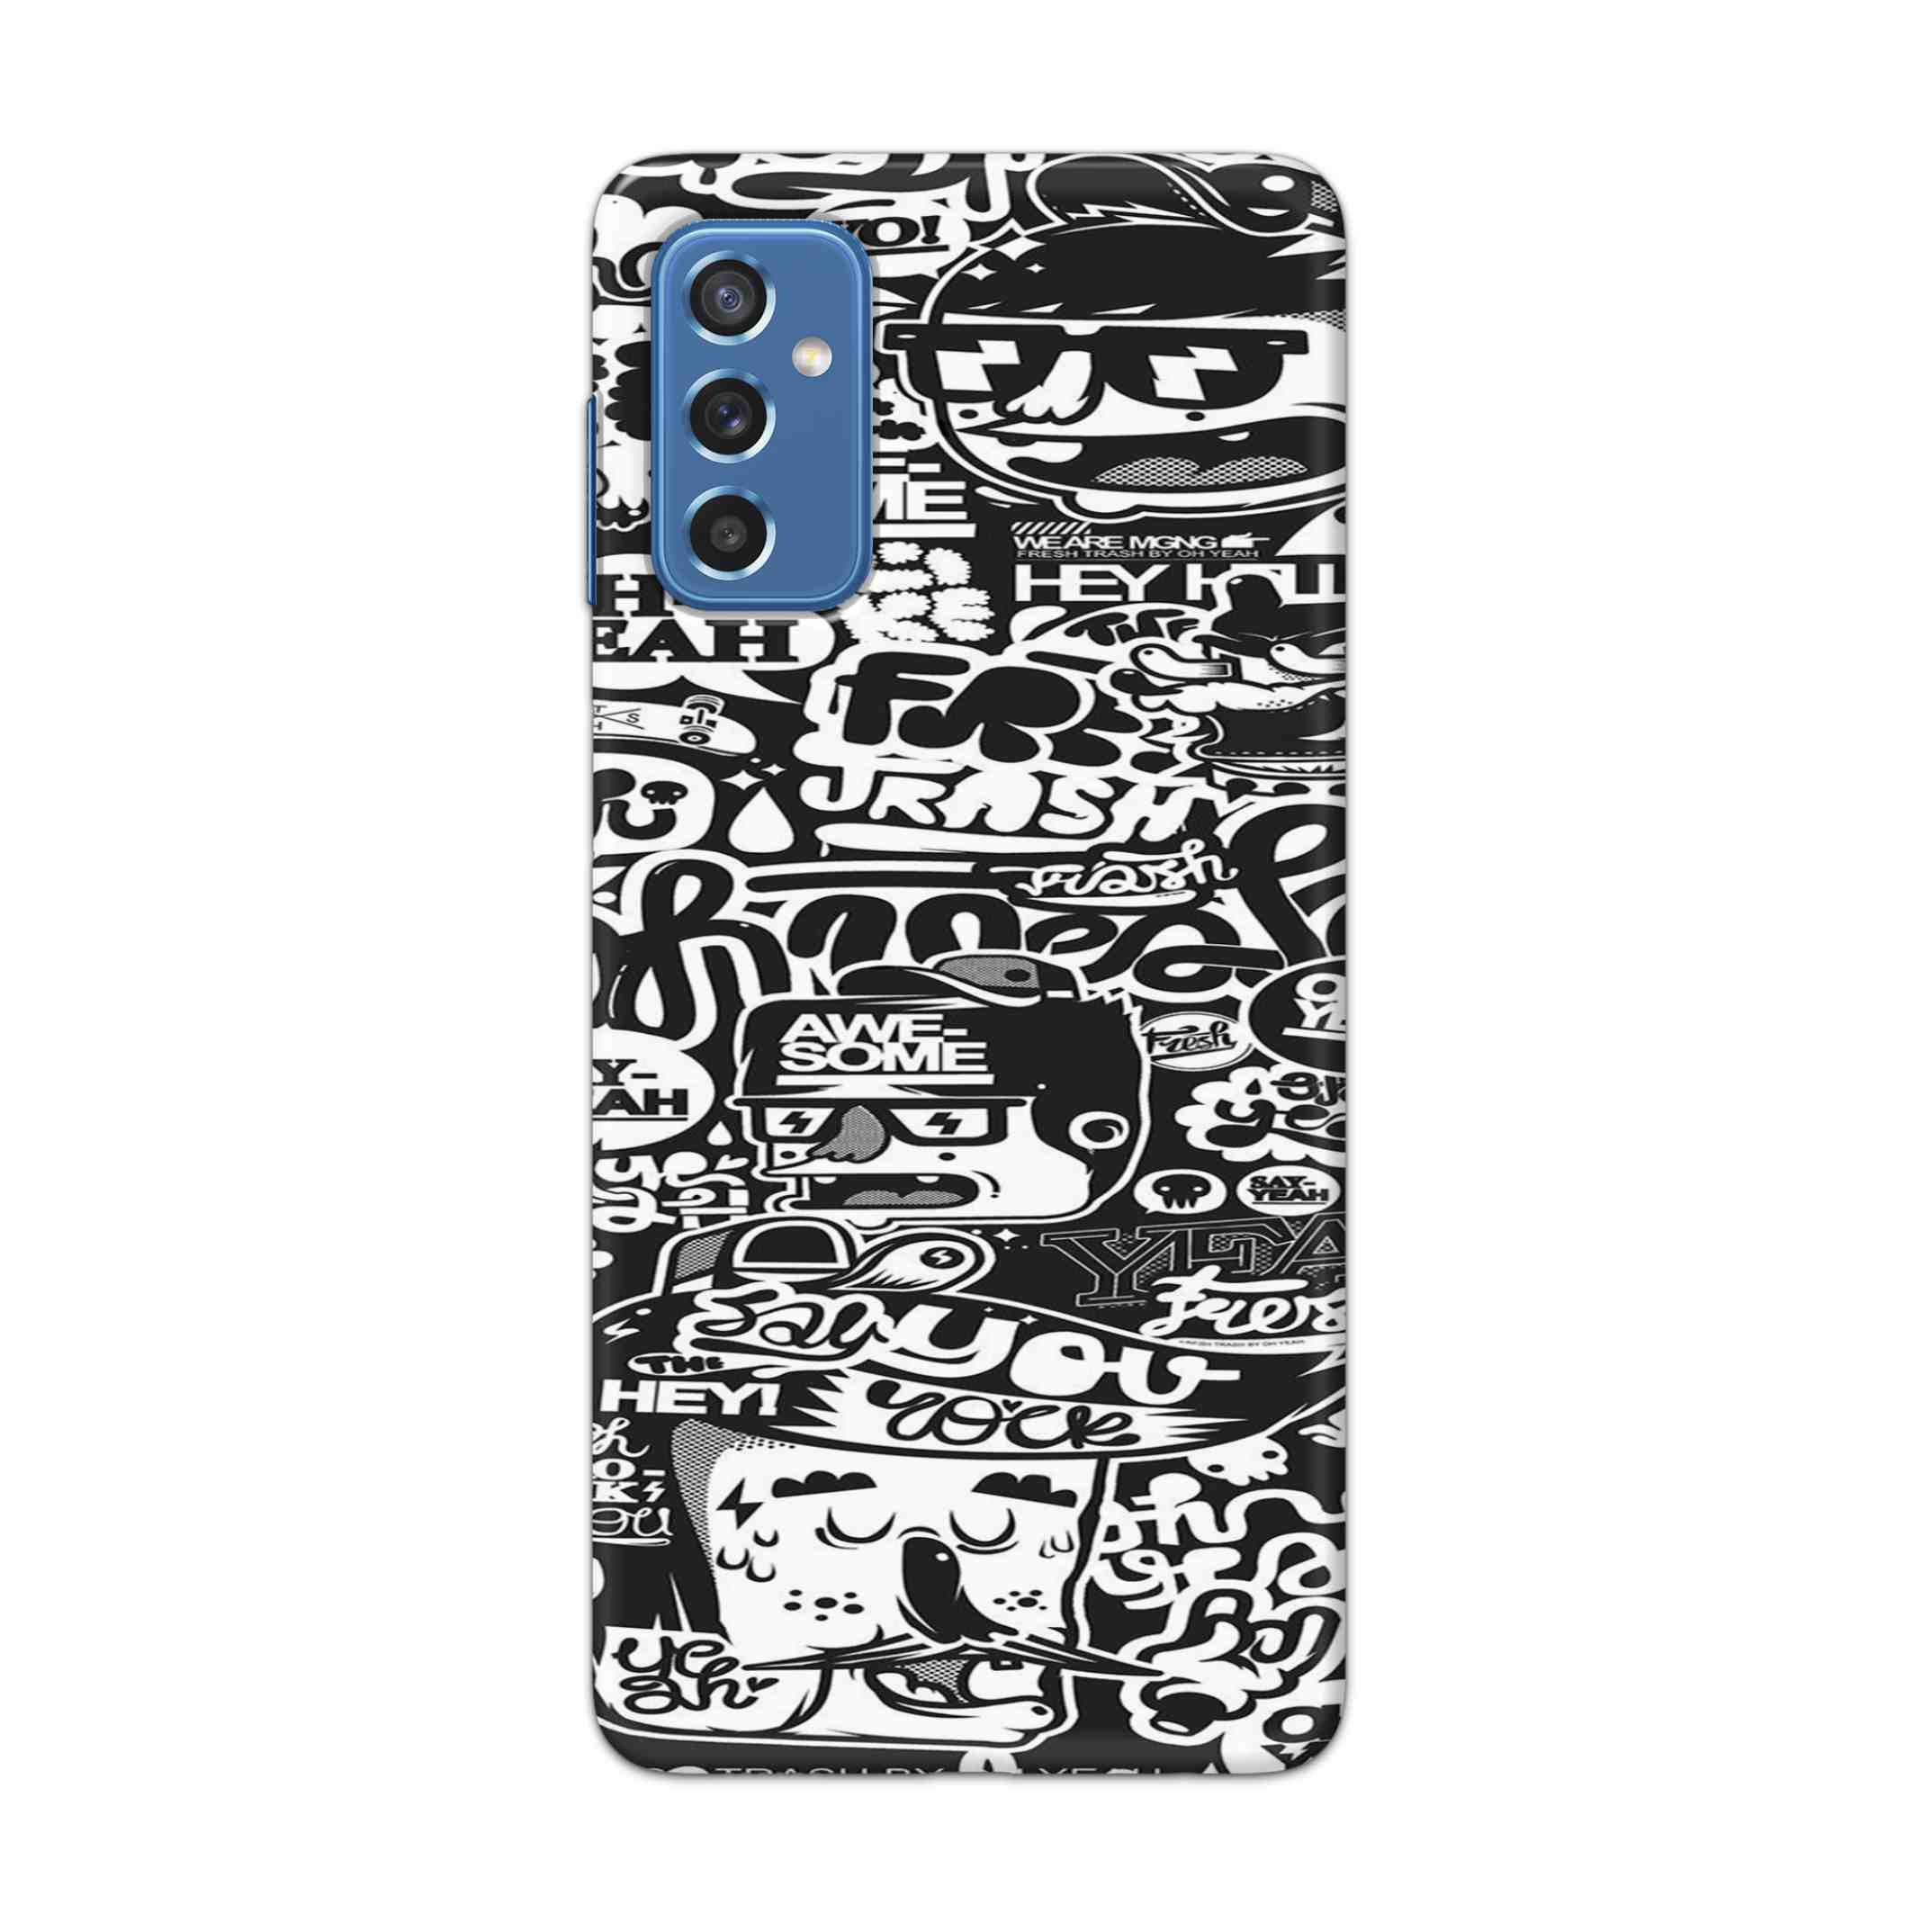 Buy Awesome Hard Back Mobile Phone Case Cover For Samsung Galaxy M52 Online